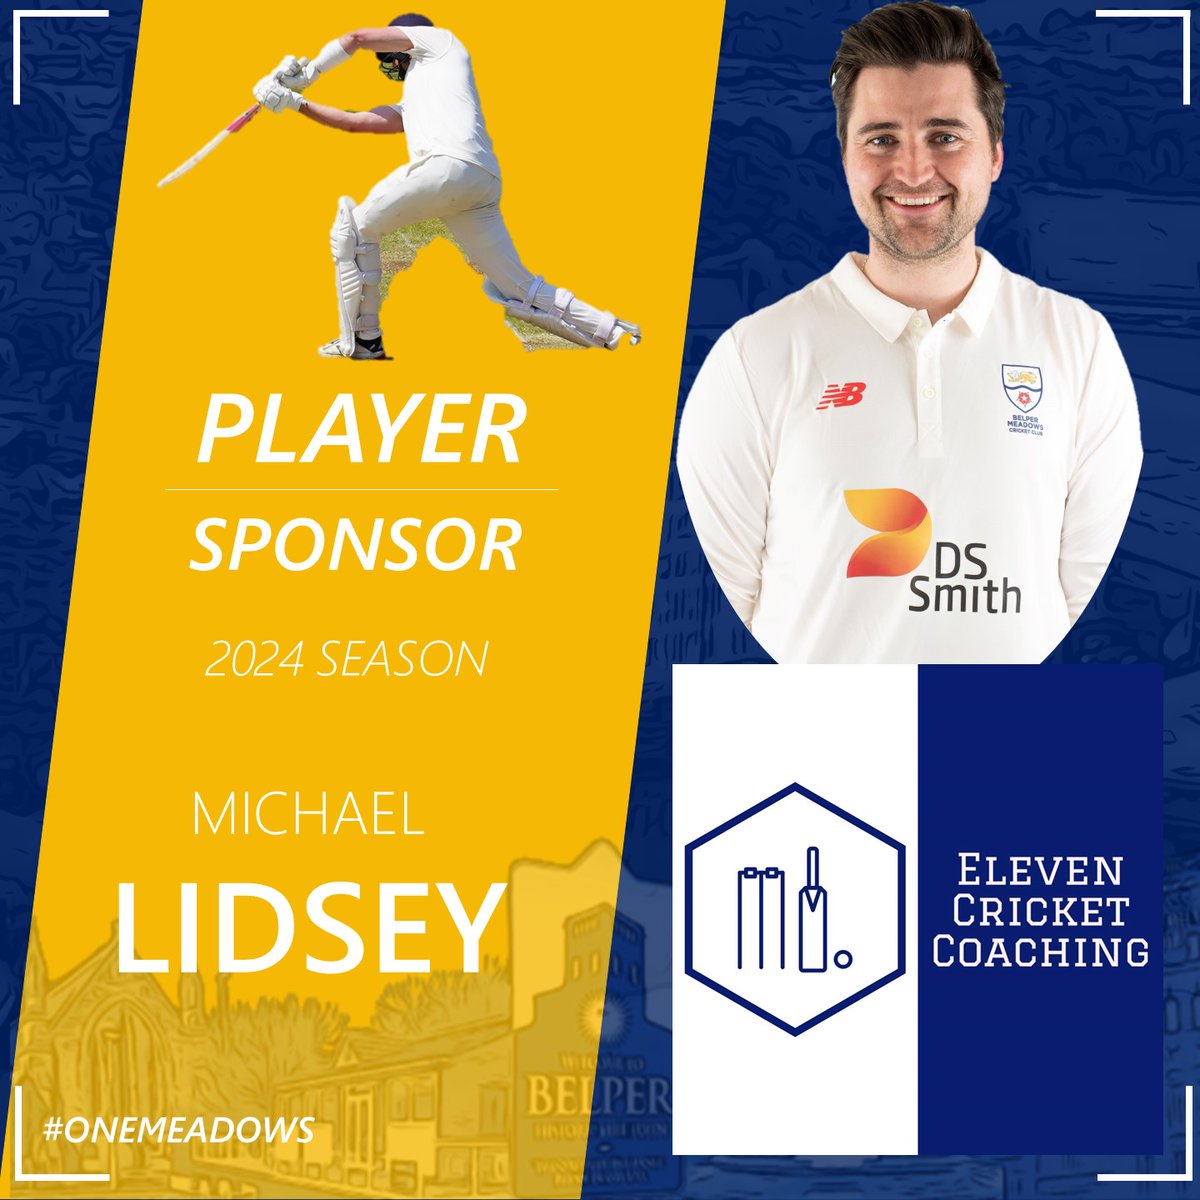 2024 PLAYER SPONSOR 🤝 We are delighted to announce that @eleven_cricket_coaching will be sponsoring first-team captain Michael Lidsey for the 2024 season. #playersponsor #elevencricketcoaching #onemeadows